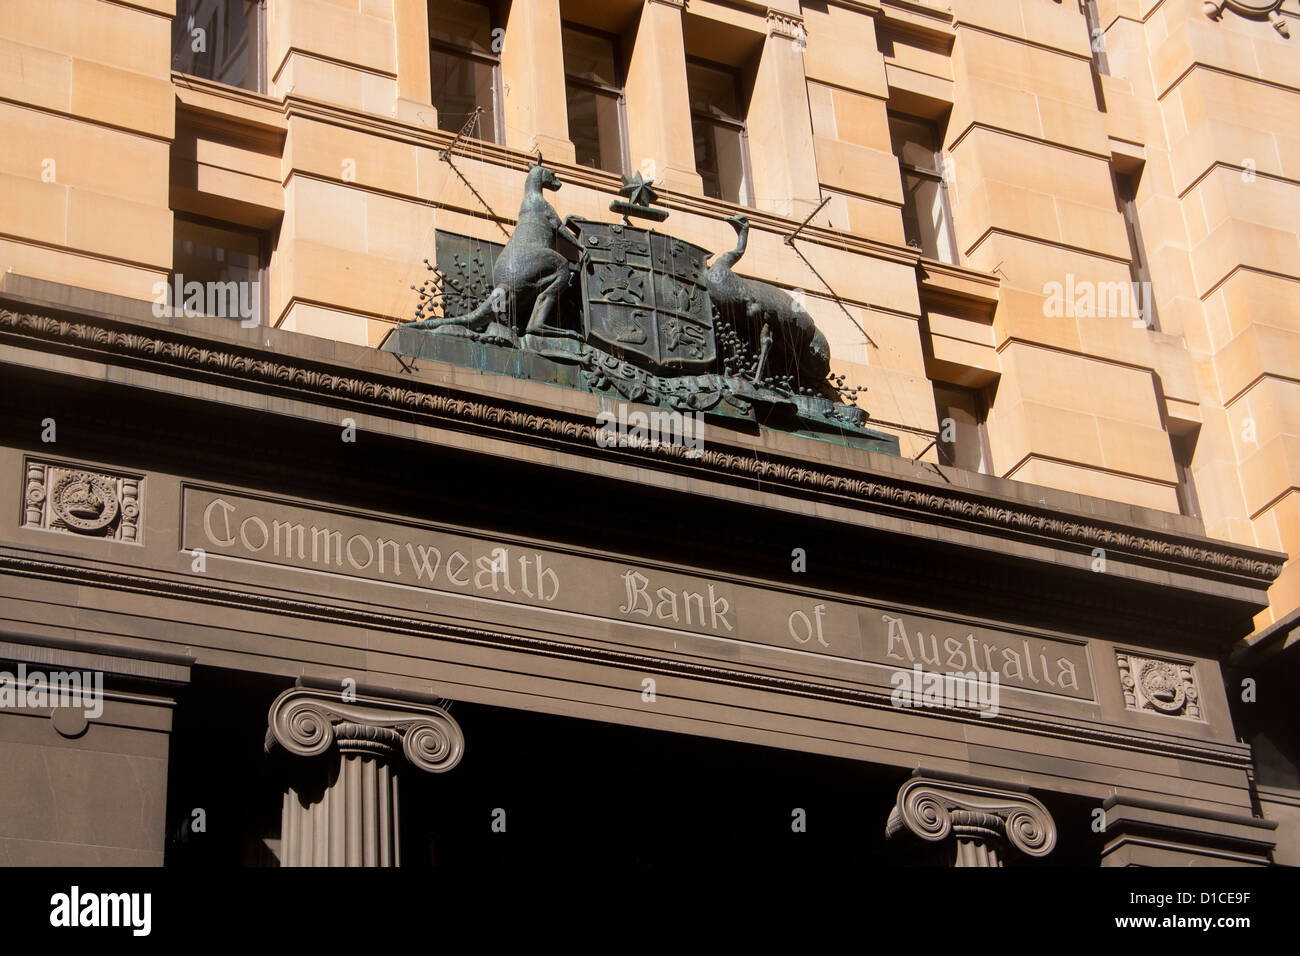 Commonwealth Bank of Australia building exterior, sign and coat of arms Martin Place CBD Sydney NSW Australia Stock Photo